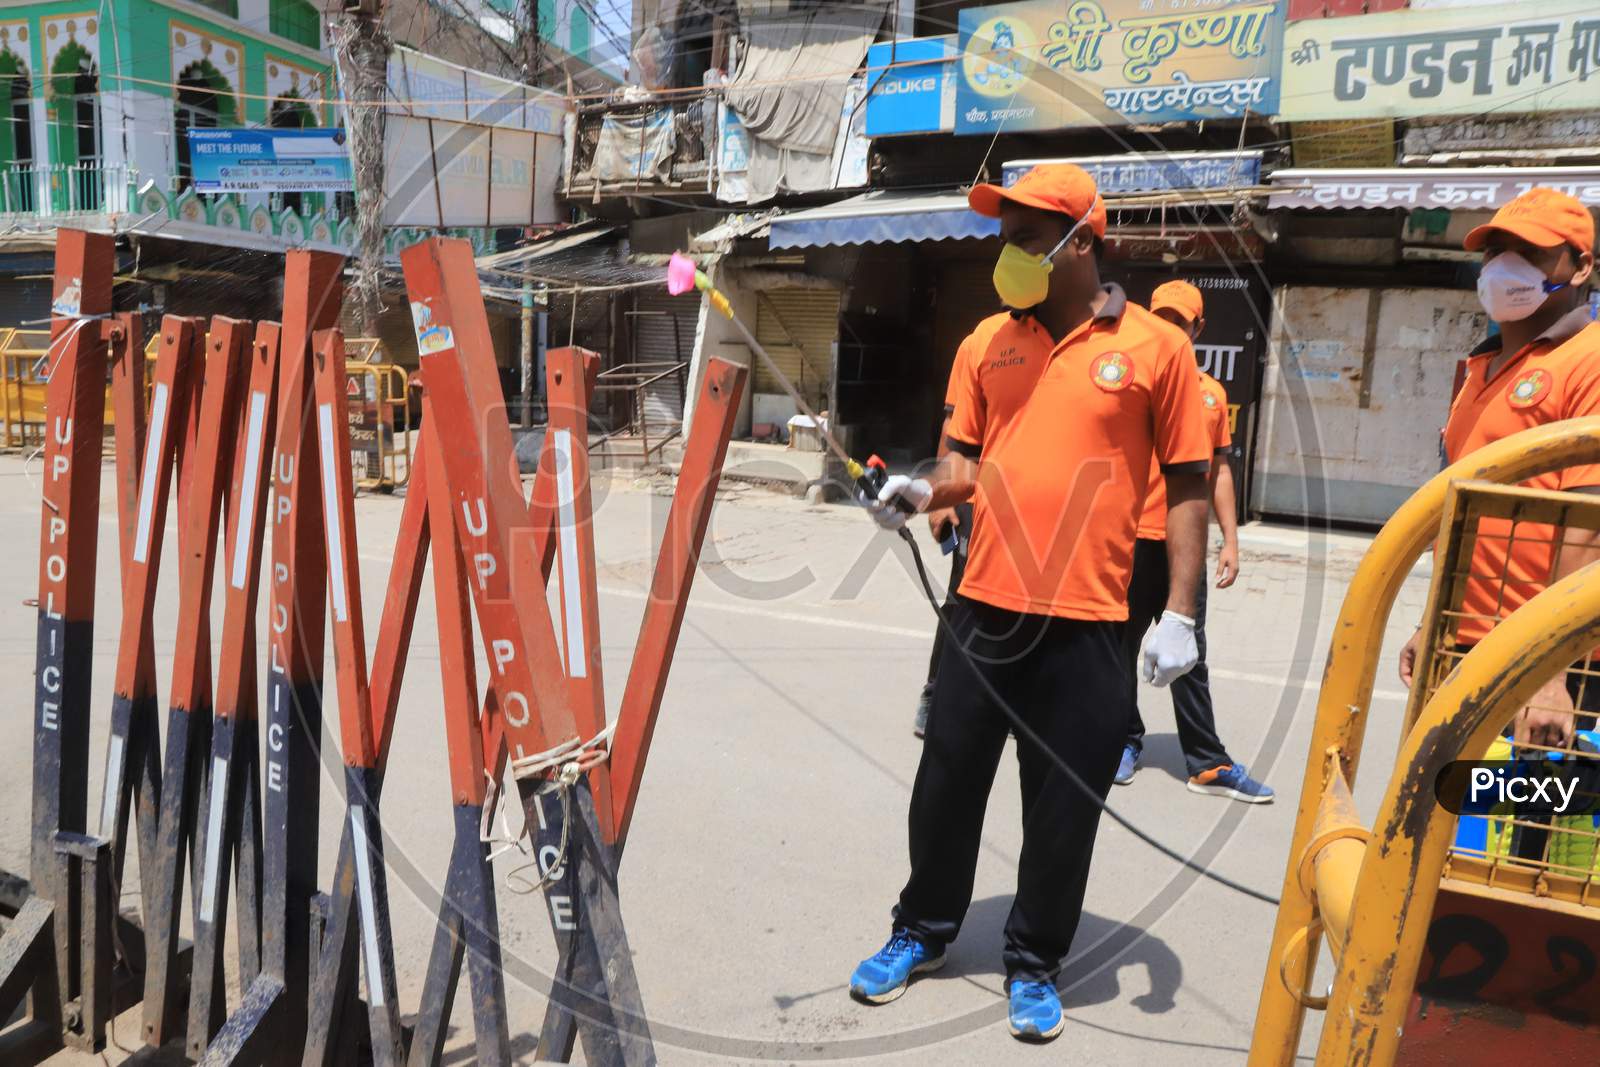 Sdrf Jawans Spray Sanitizer On The Road Side Barricades During A Nationwide Lockdown To Slow The Spreading Of The Coronavirus Disease (Covid-19), In Prayagraj, April, 17, 2020.